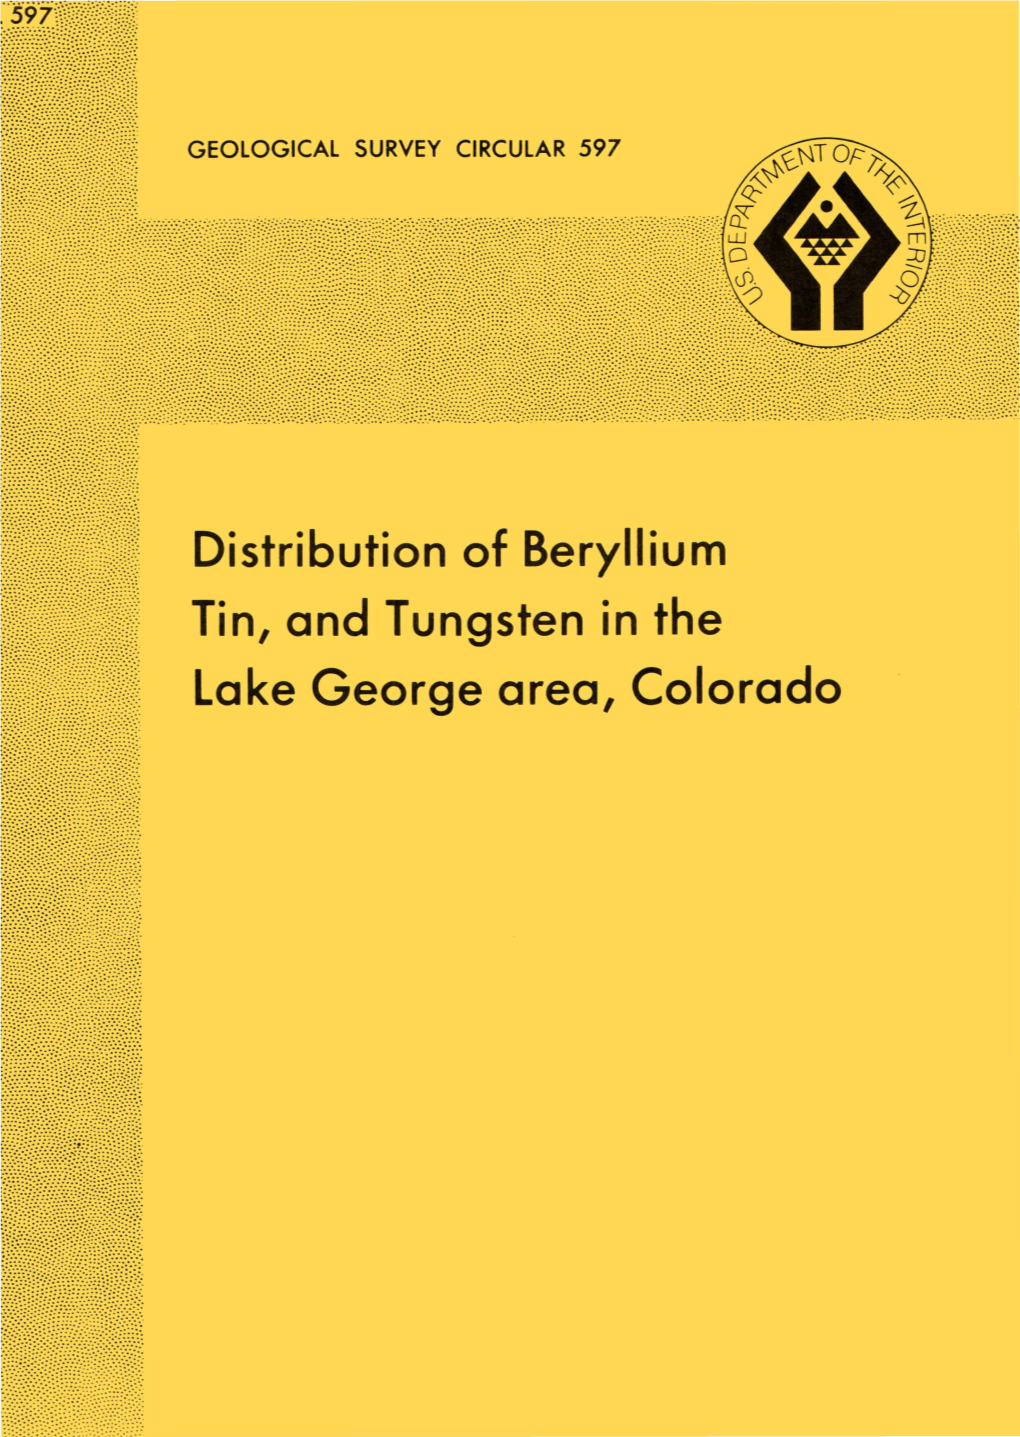 Distribution of Beryllium Tin, and Tungsten in the Lake George Area, Colorado Distribution of Beryllium Tin, and Tungsten in the Lake George Area, Colorado